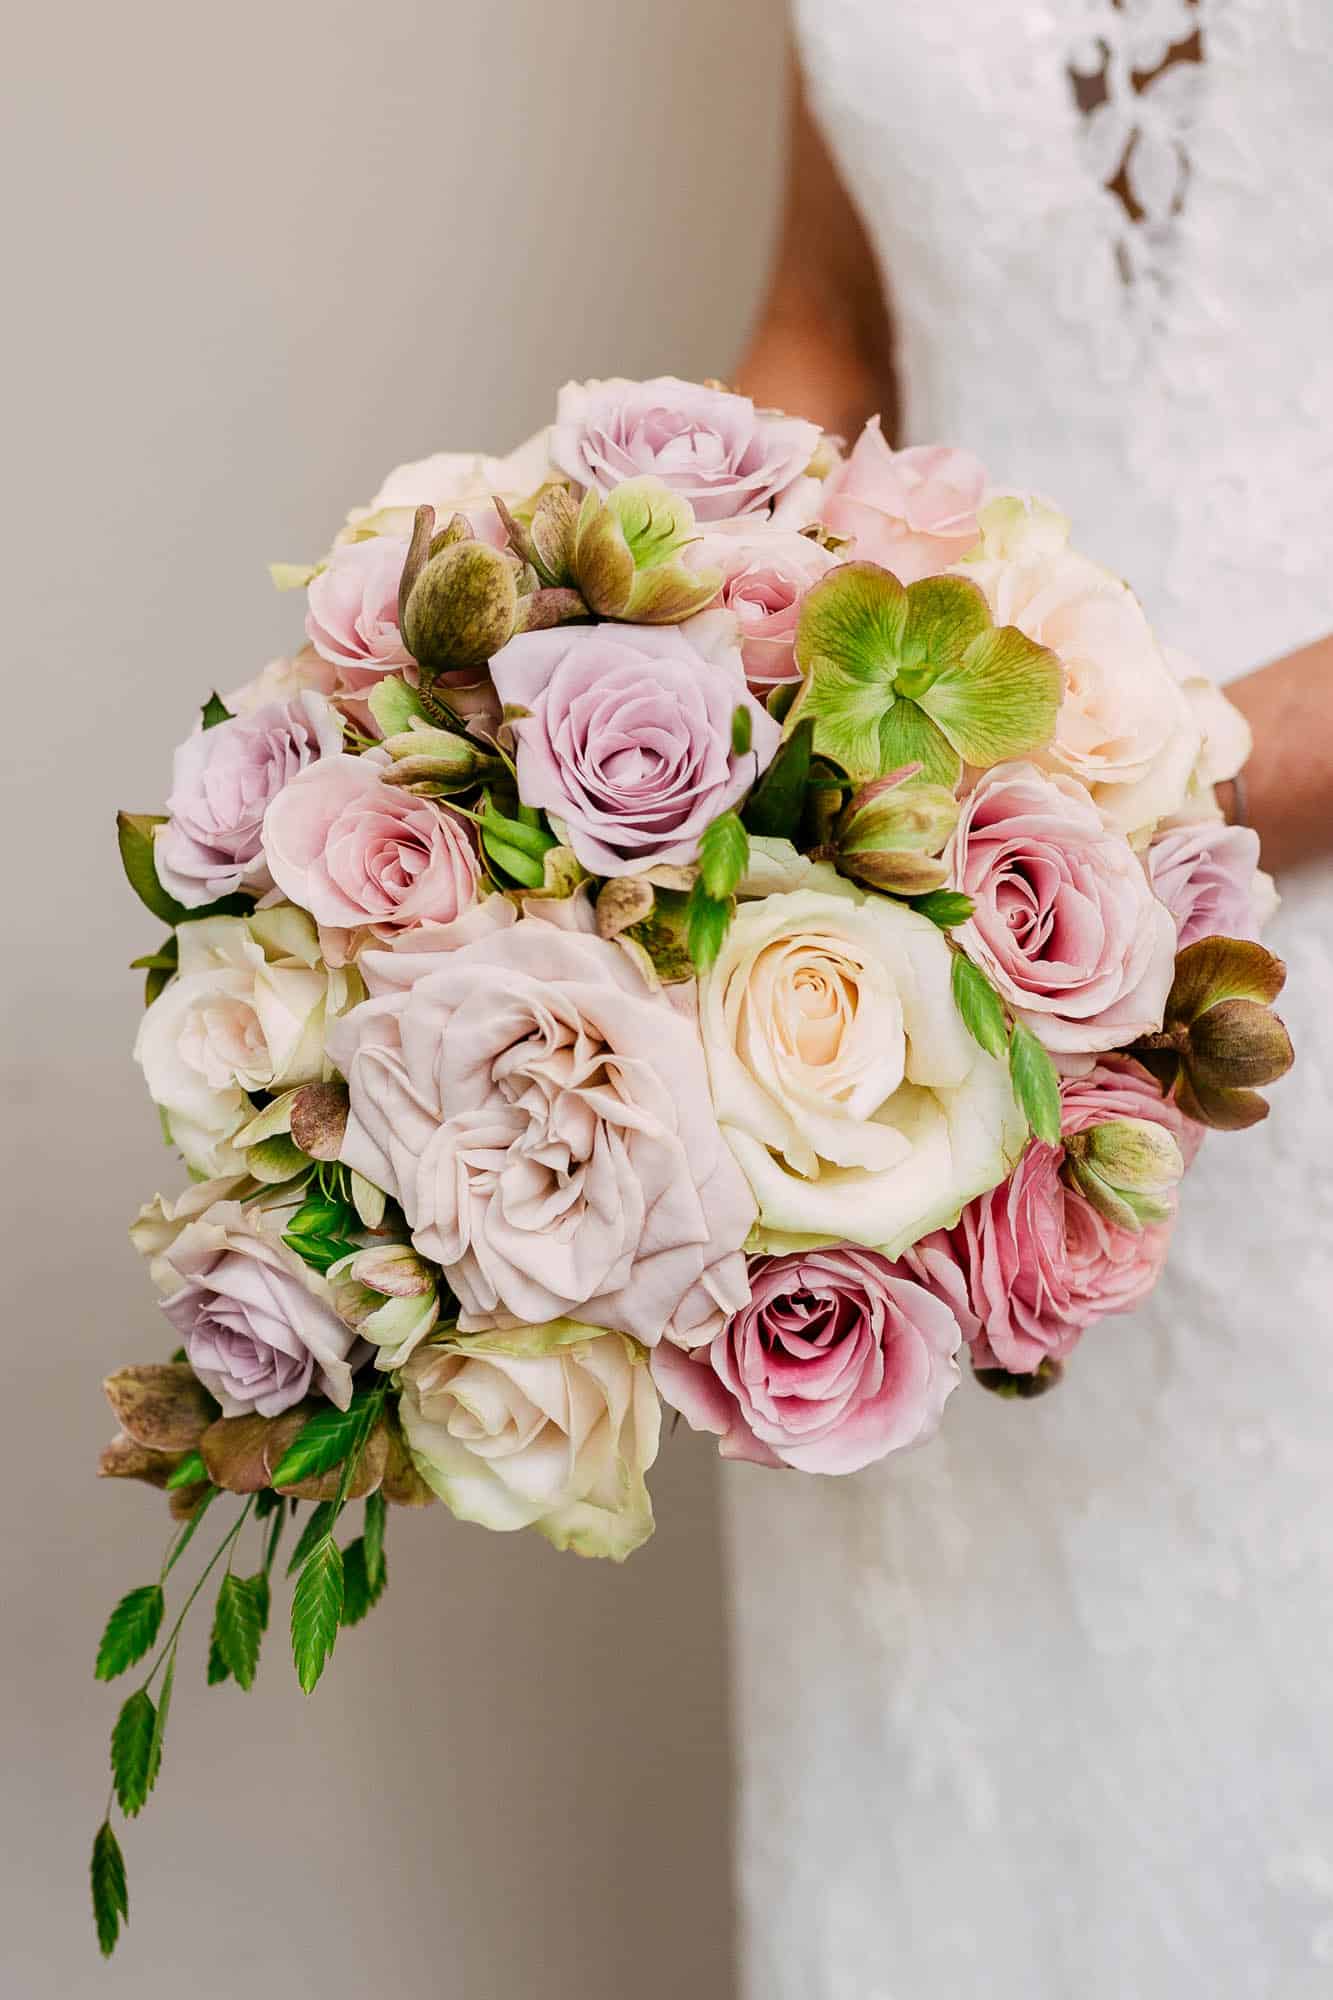 A bride loves a wedding bouquet of pink and white roses.